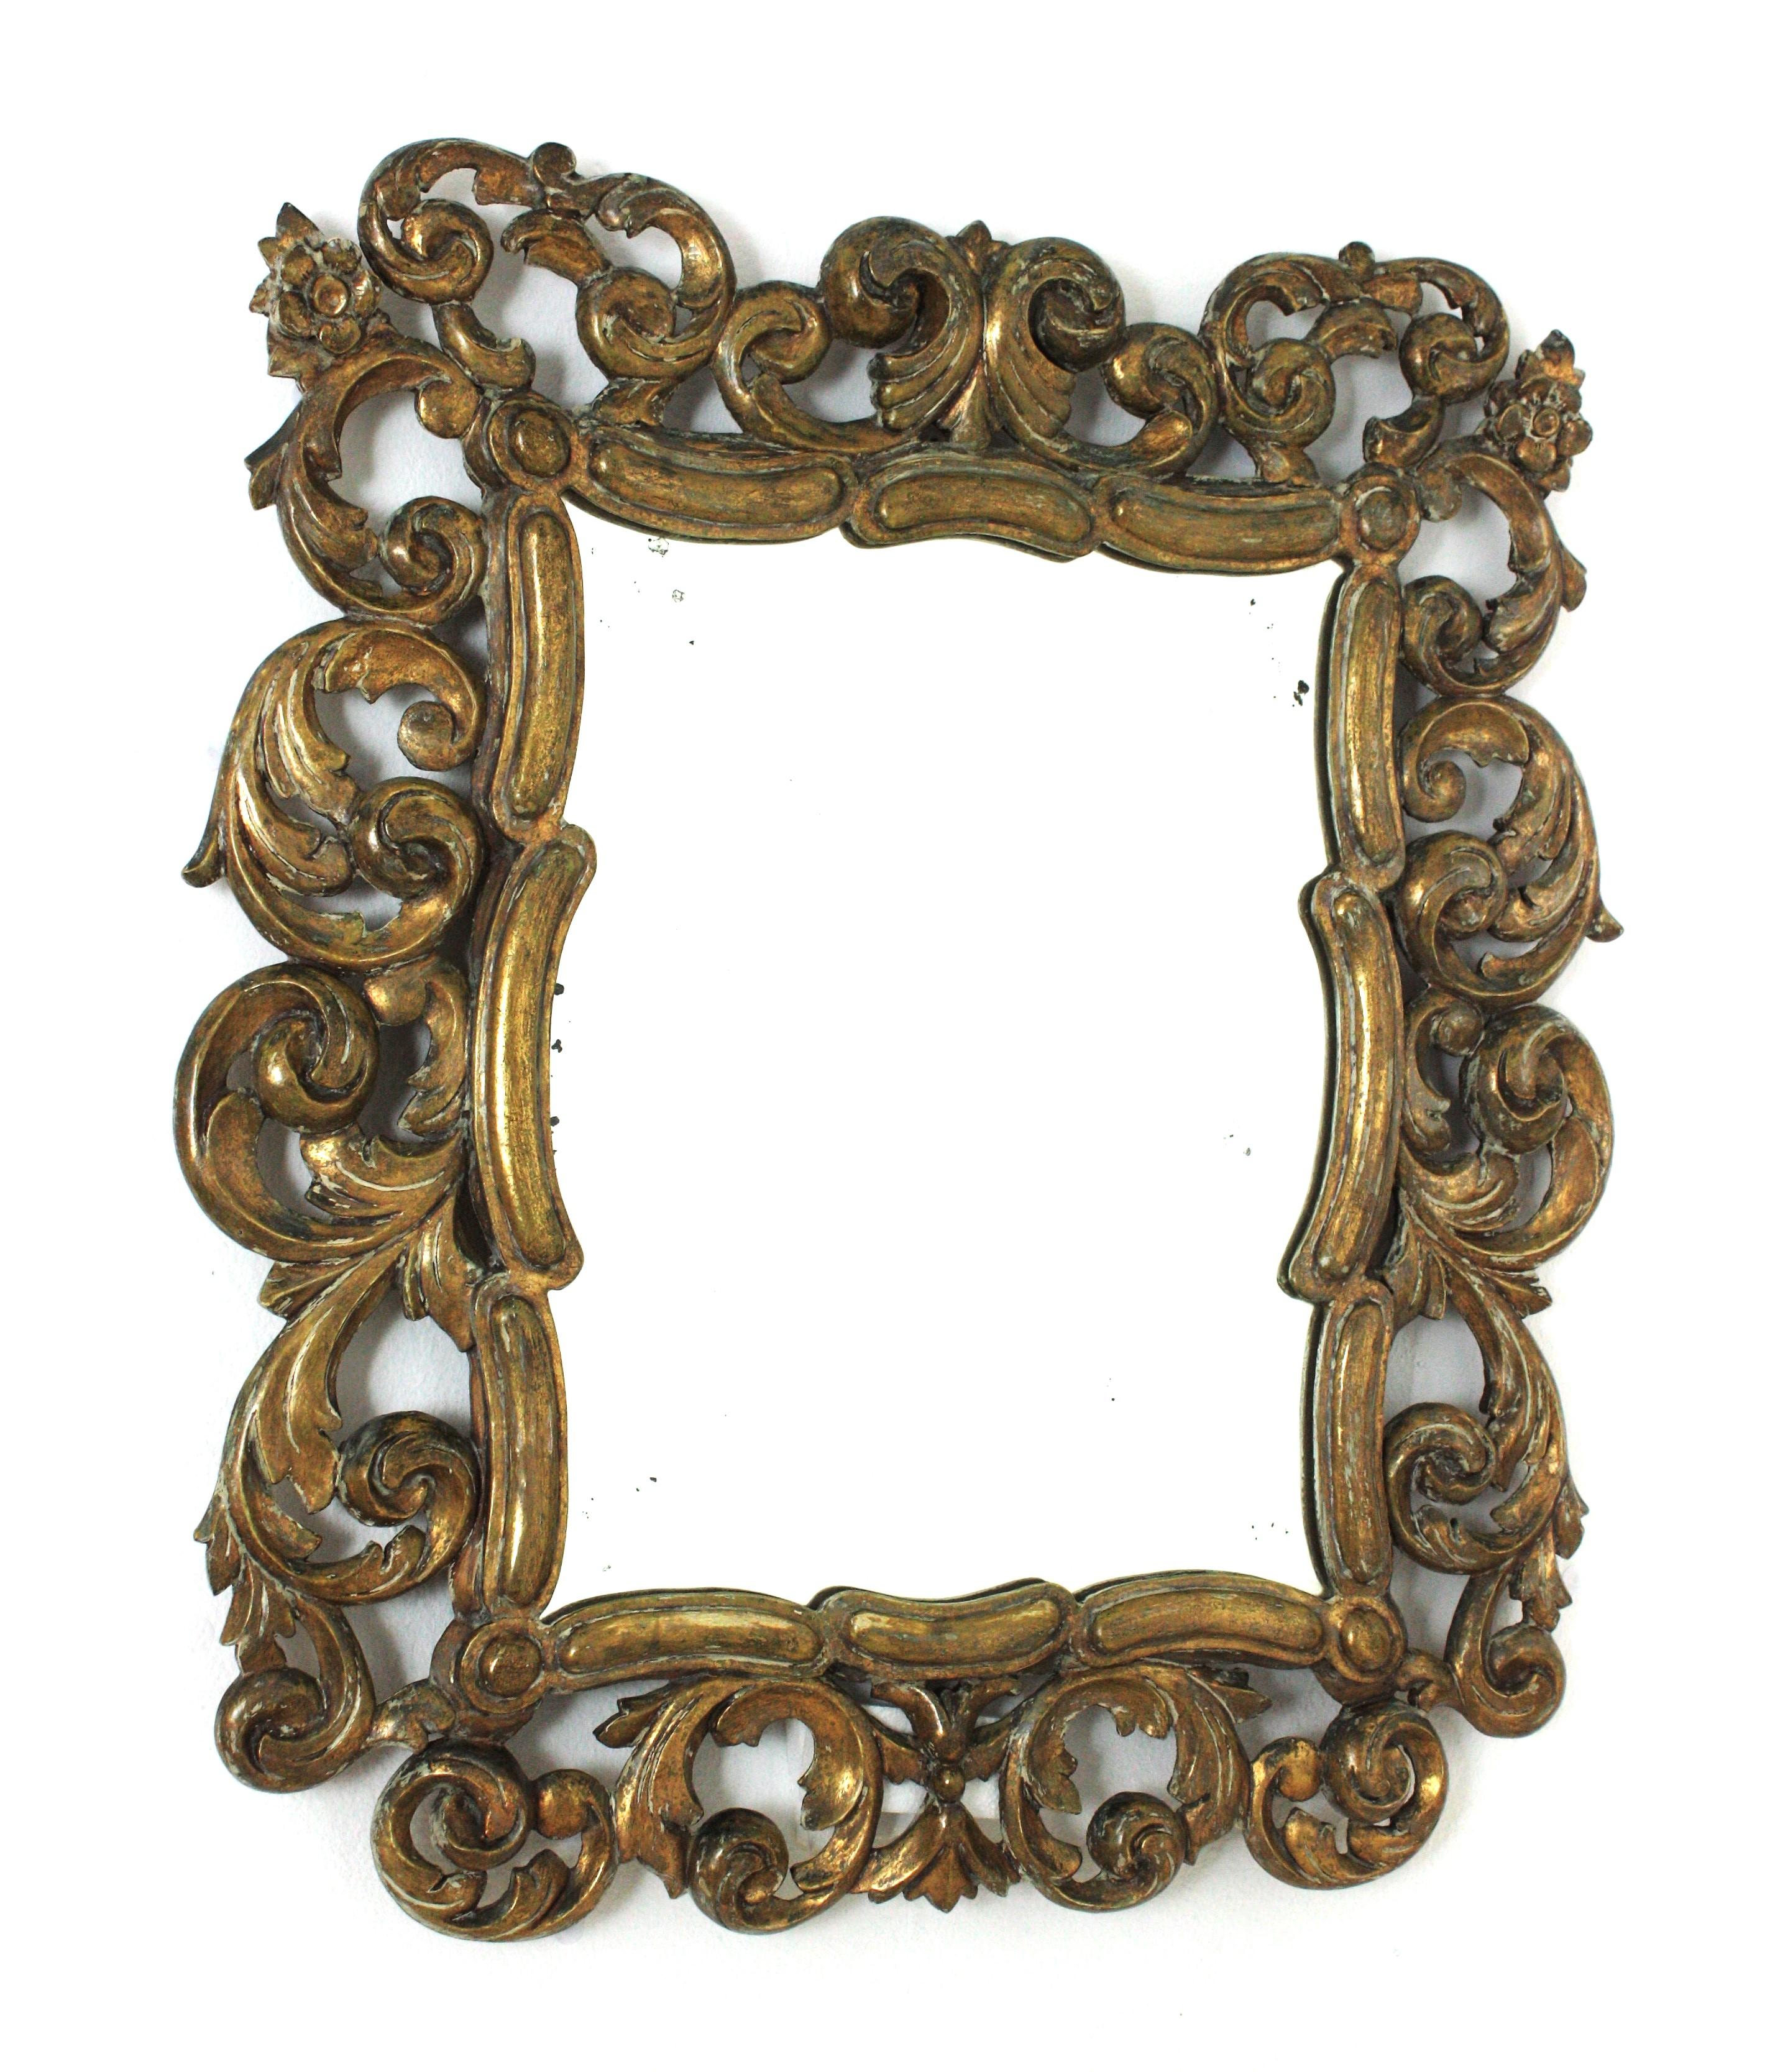 Finely Carved Giltwood Rococo Style Mirror, Spain, Early 20th century.
The frame is richly adorned with carved leaves, flowers and scrollwork details. It wears its original glass. It has a dramatic aged patina and gold leaf gilding.
Lovely to place